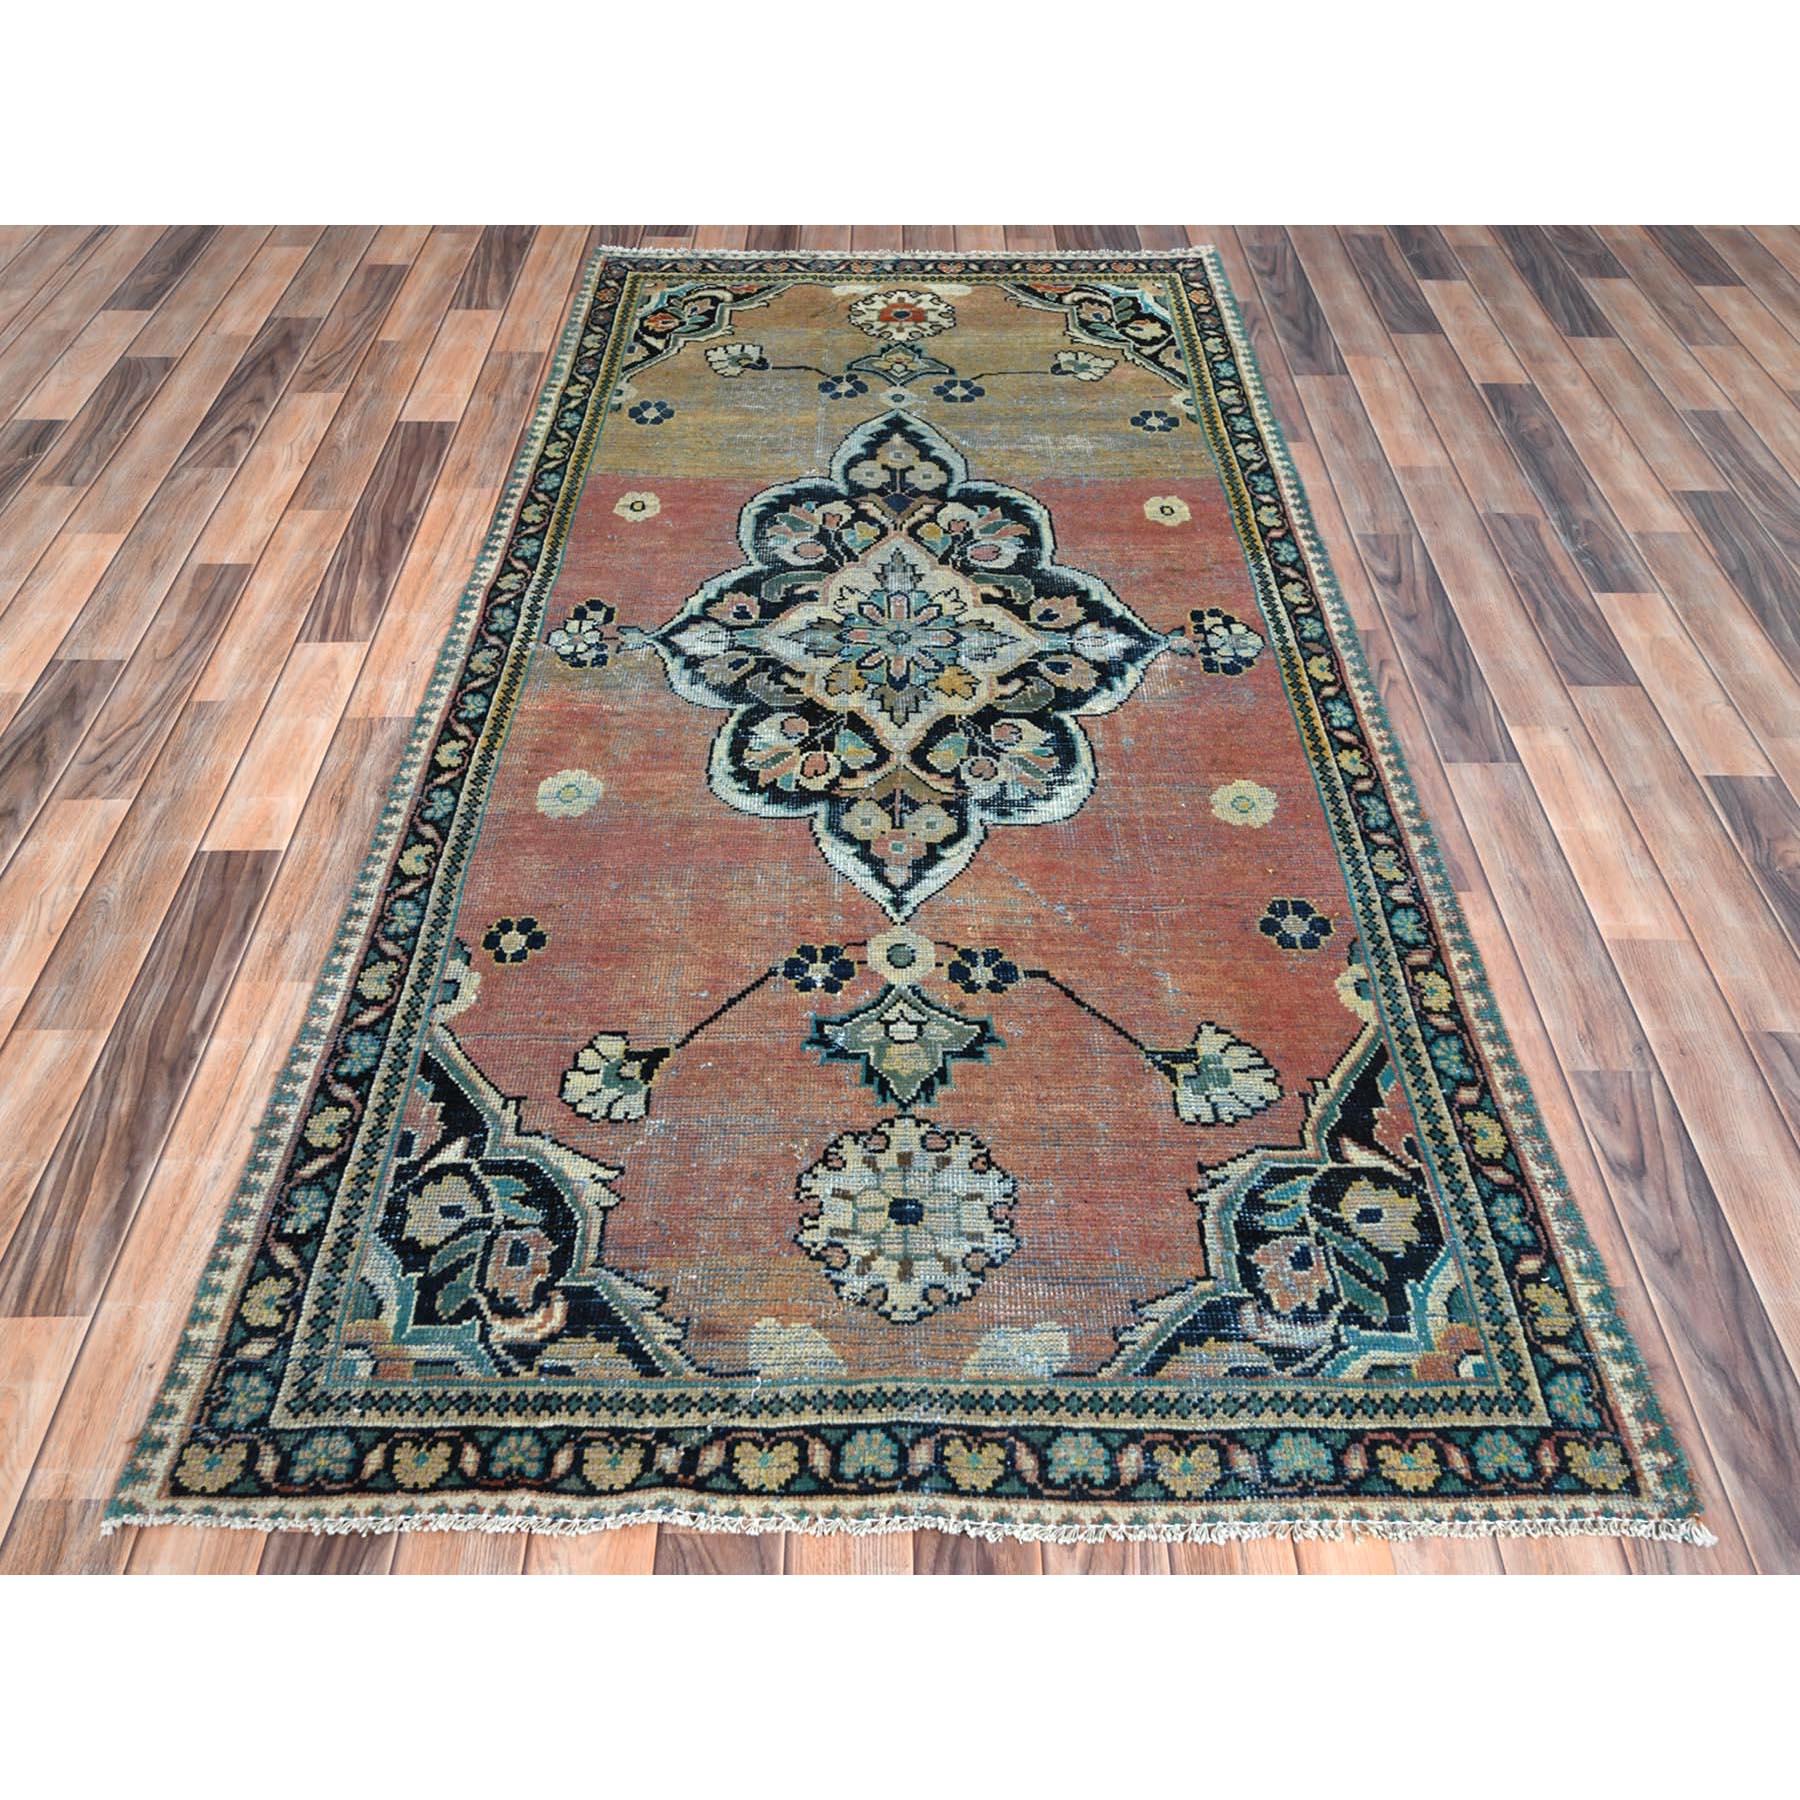 This fabulous Hand-Knotted carpet has been created and designed for extra strength and durability. This rug has been handcrafted for weeks in the traditional method that is used to make
Exact Rug Size in Feet and Inches : 3'10